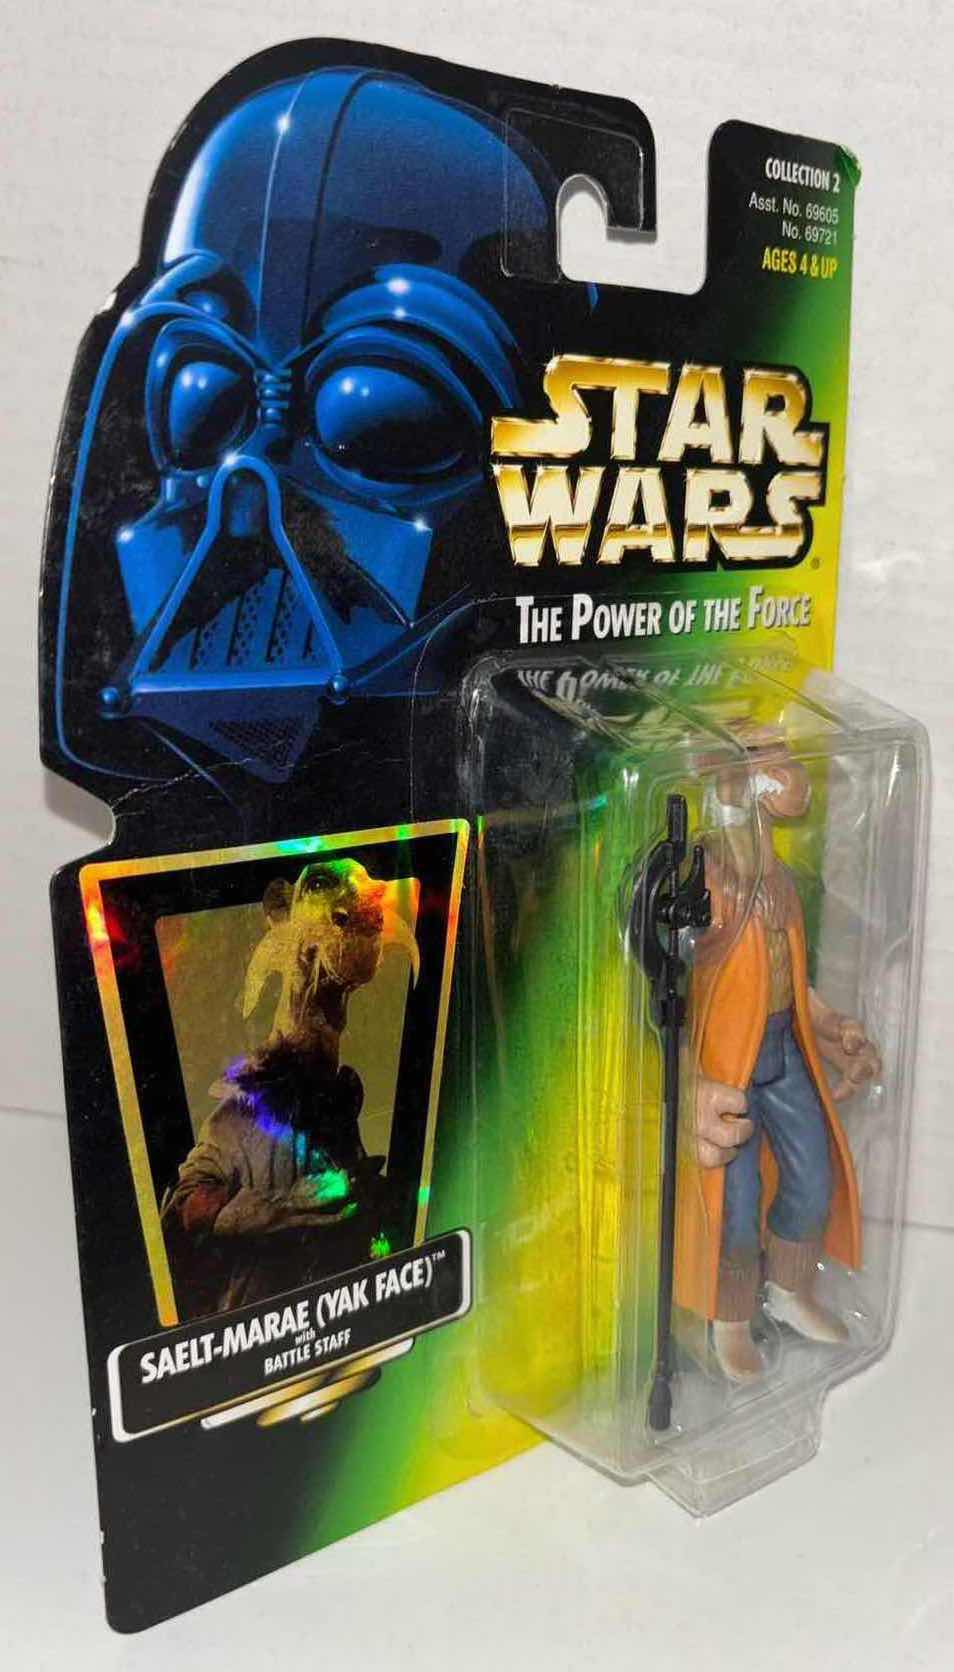 Photo 2 of NEW KENNER STAR WARS POWER OF THE FORCE ACTION FIGURE, SAELT-MARAE (YAK FACE) W BATTLE STAFF